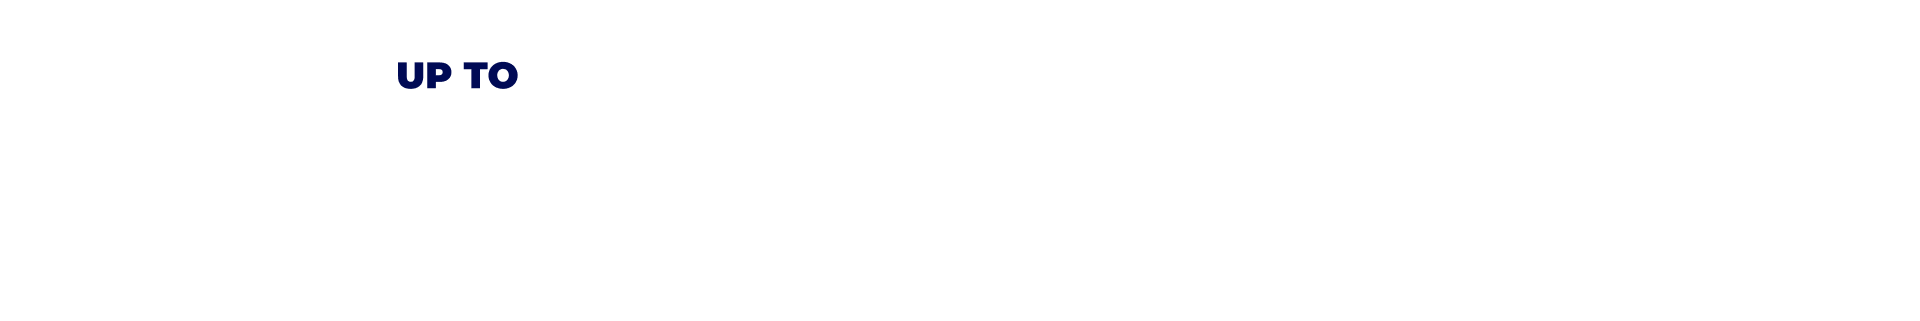 Up to 70% off Christmas